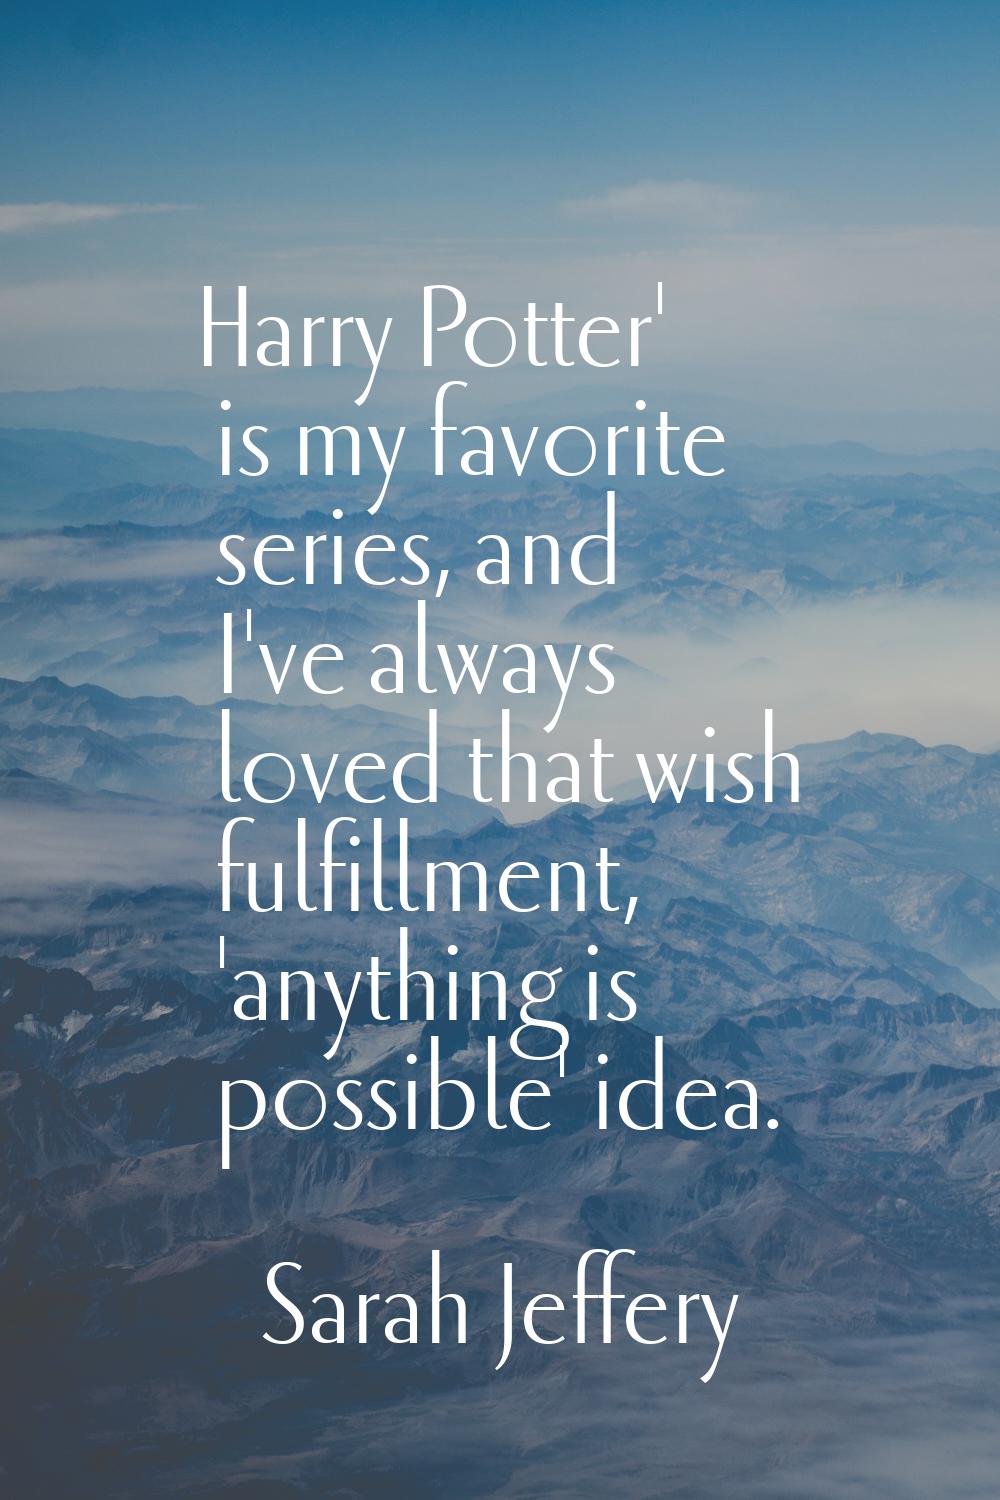 Harry Potter' is my favorite series, and I've always loved that wish fulfillment, 'anything is poss